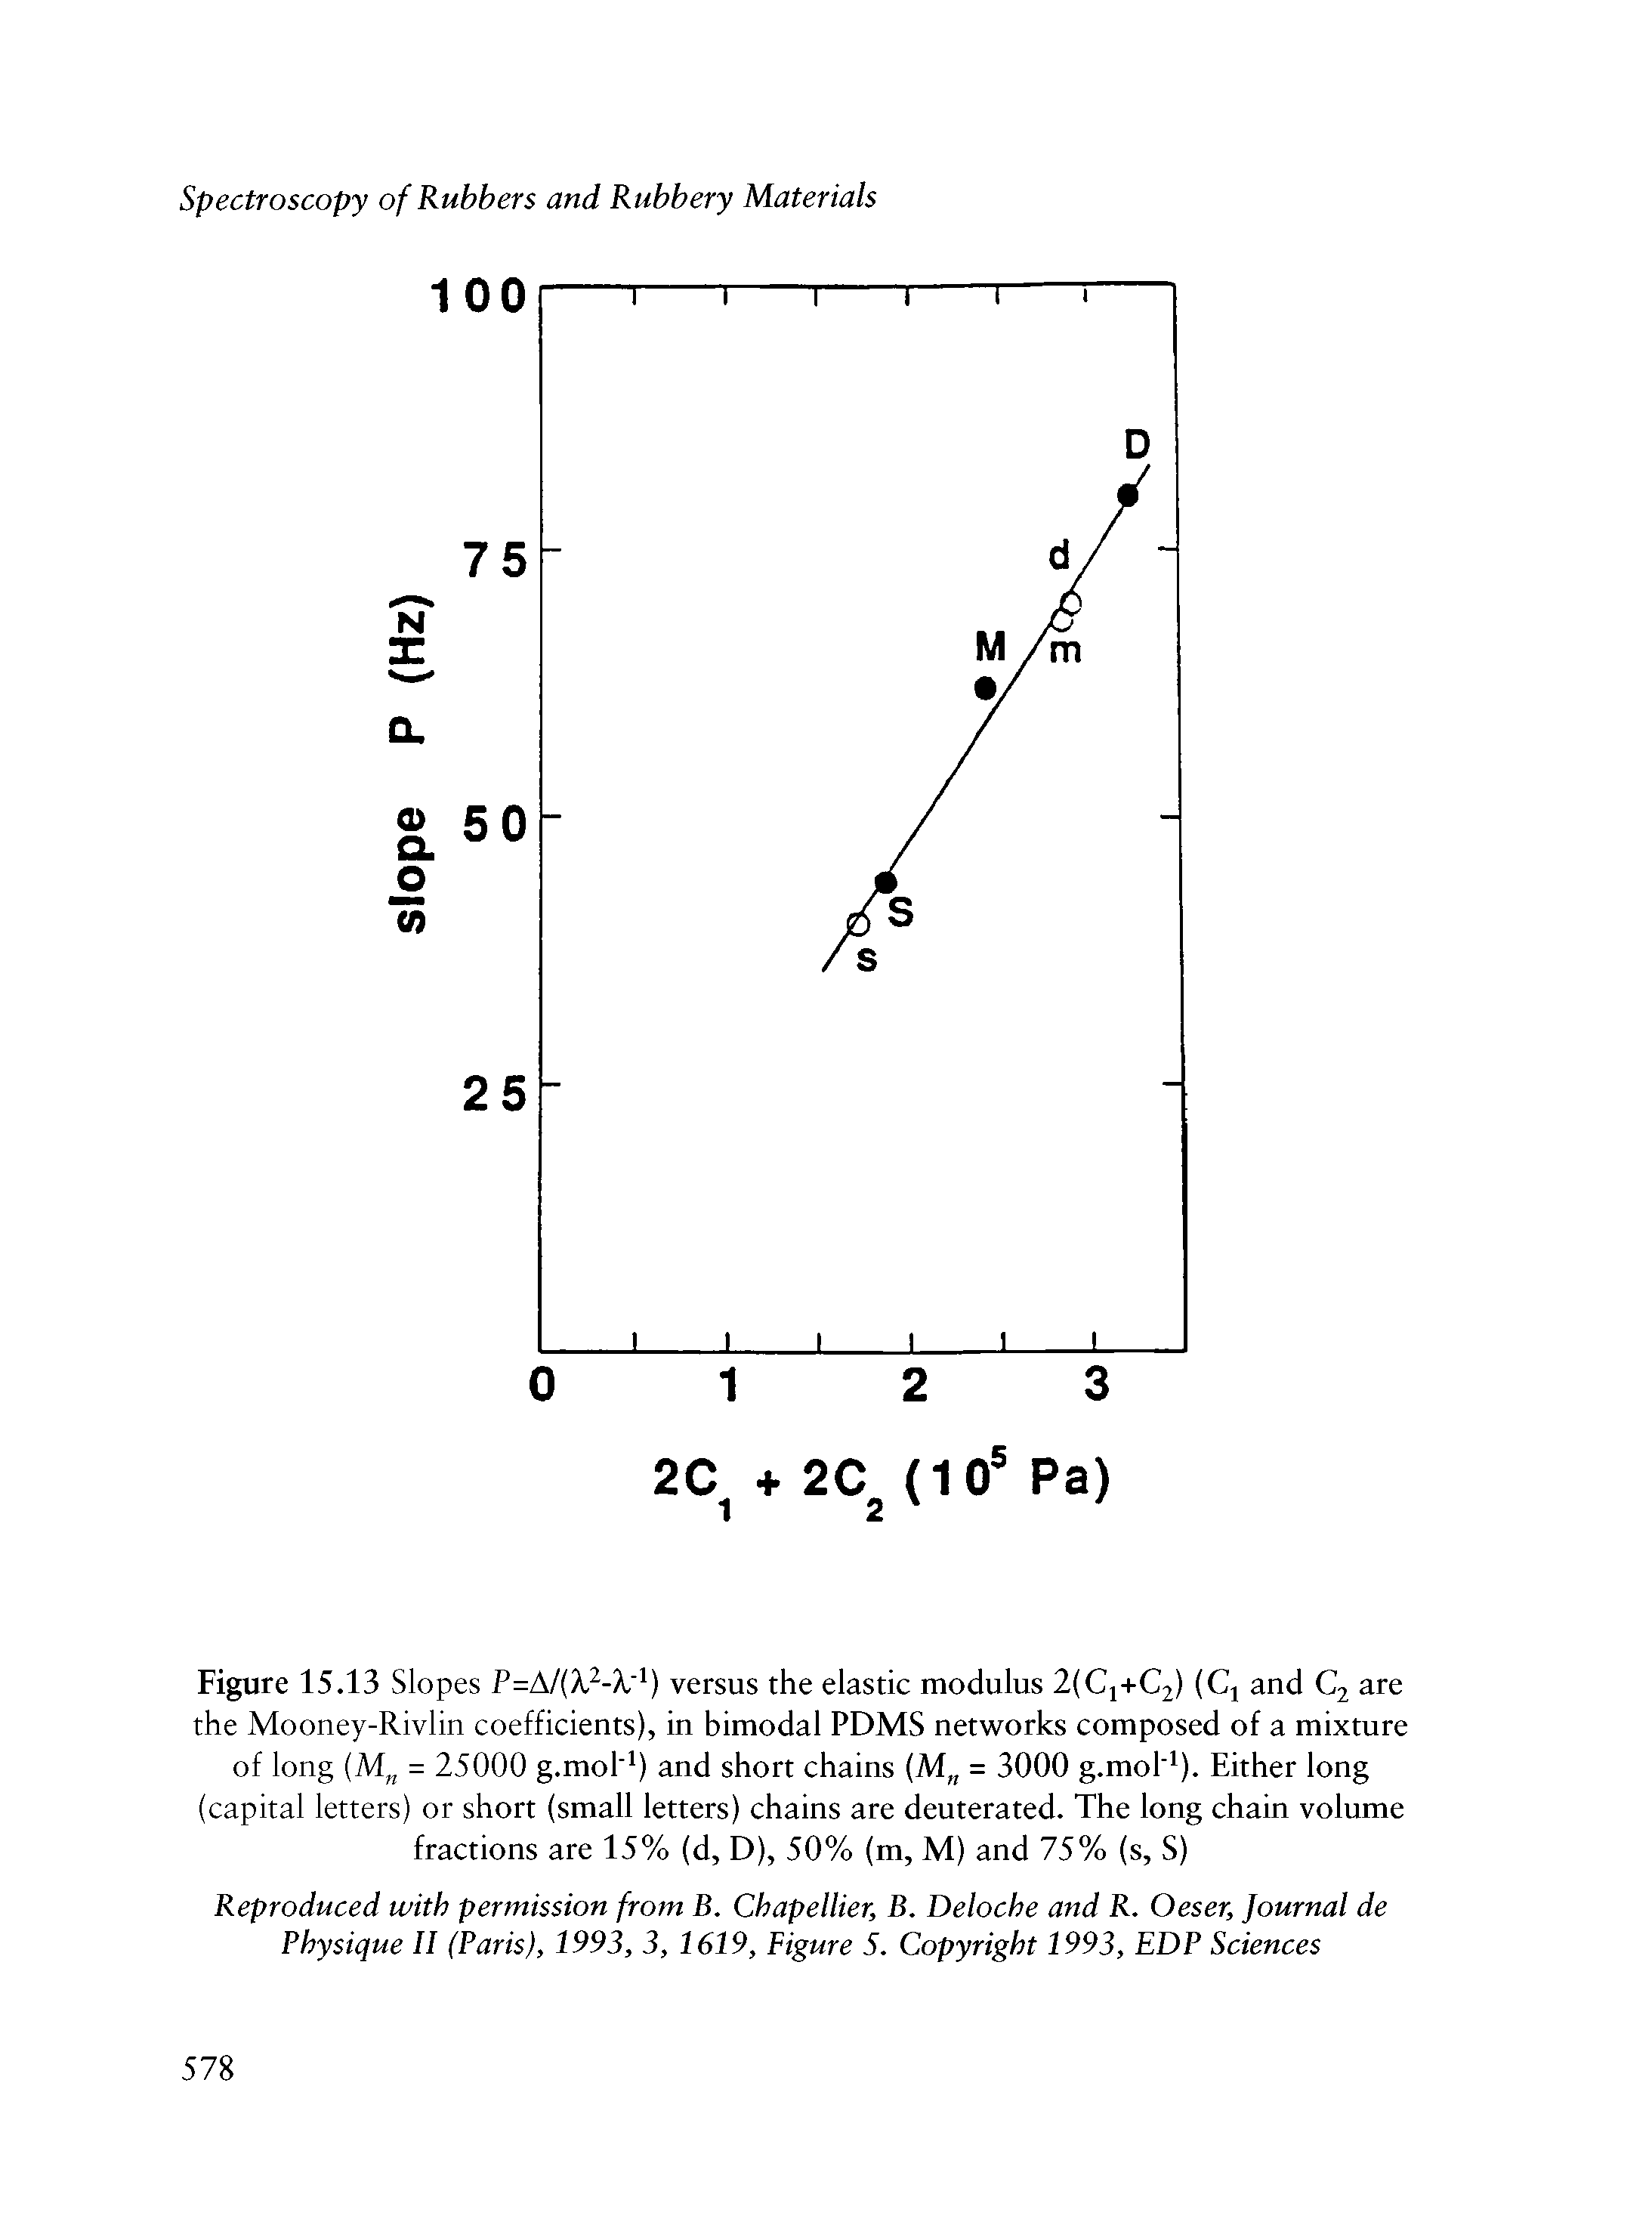 Figure 15.13 Slopes P=A/( k2- k i) versus the elastic modulus 2(Cj+C2) (Cj and C2 are the Mooney-Rivlin coefficients), in bimodal PDMS networks composed of a mixture of long (Mn = 25000 g.mol"1) and short chains (Mn = 3000 g.mol"1). Either long (capital letters) or short (small letters) chains are deuterated. The long chain volume fractions are 15% (d, D), 50% (m, M) and 75% (s, S)...